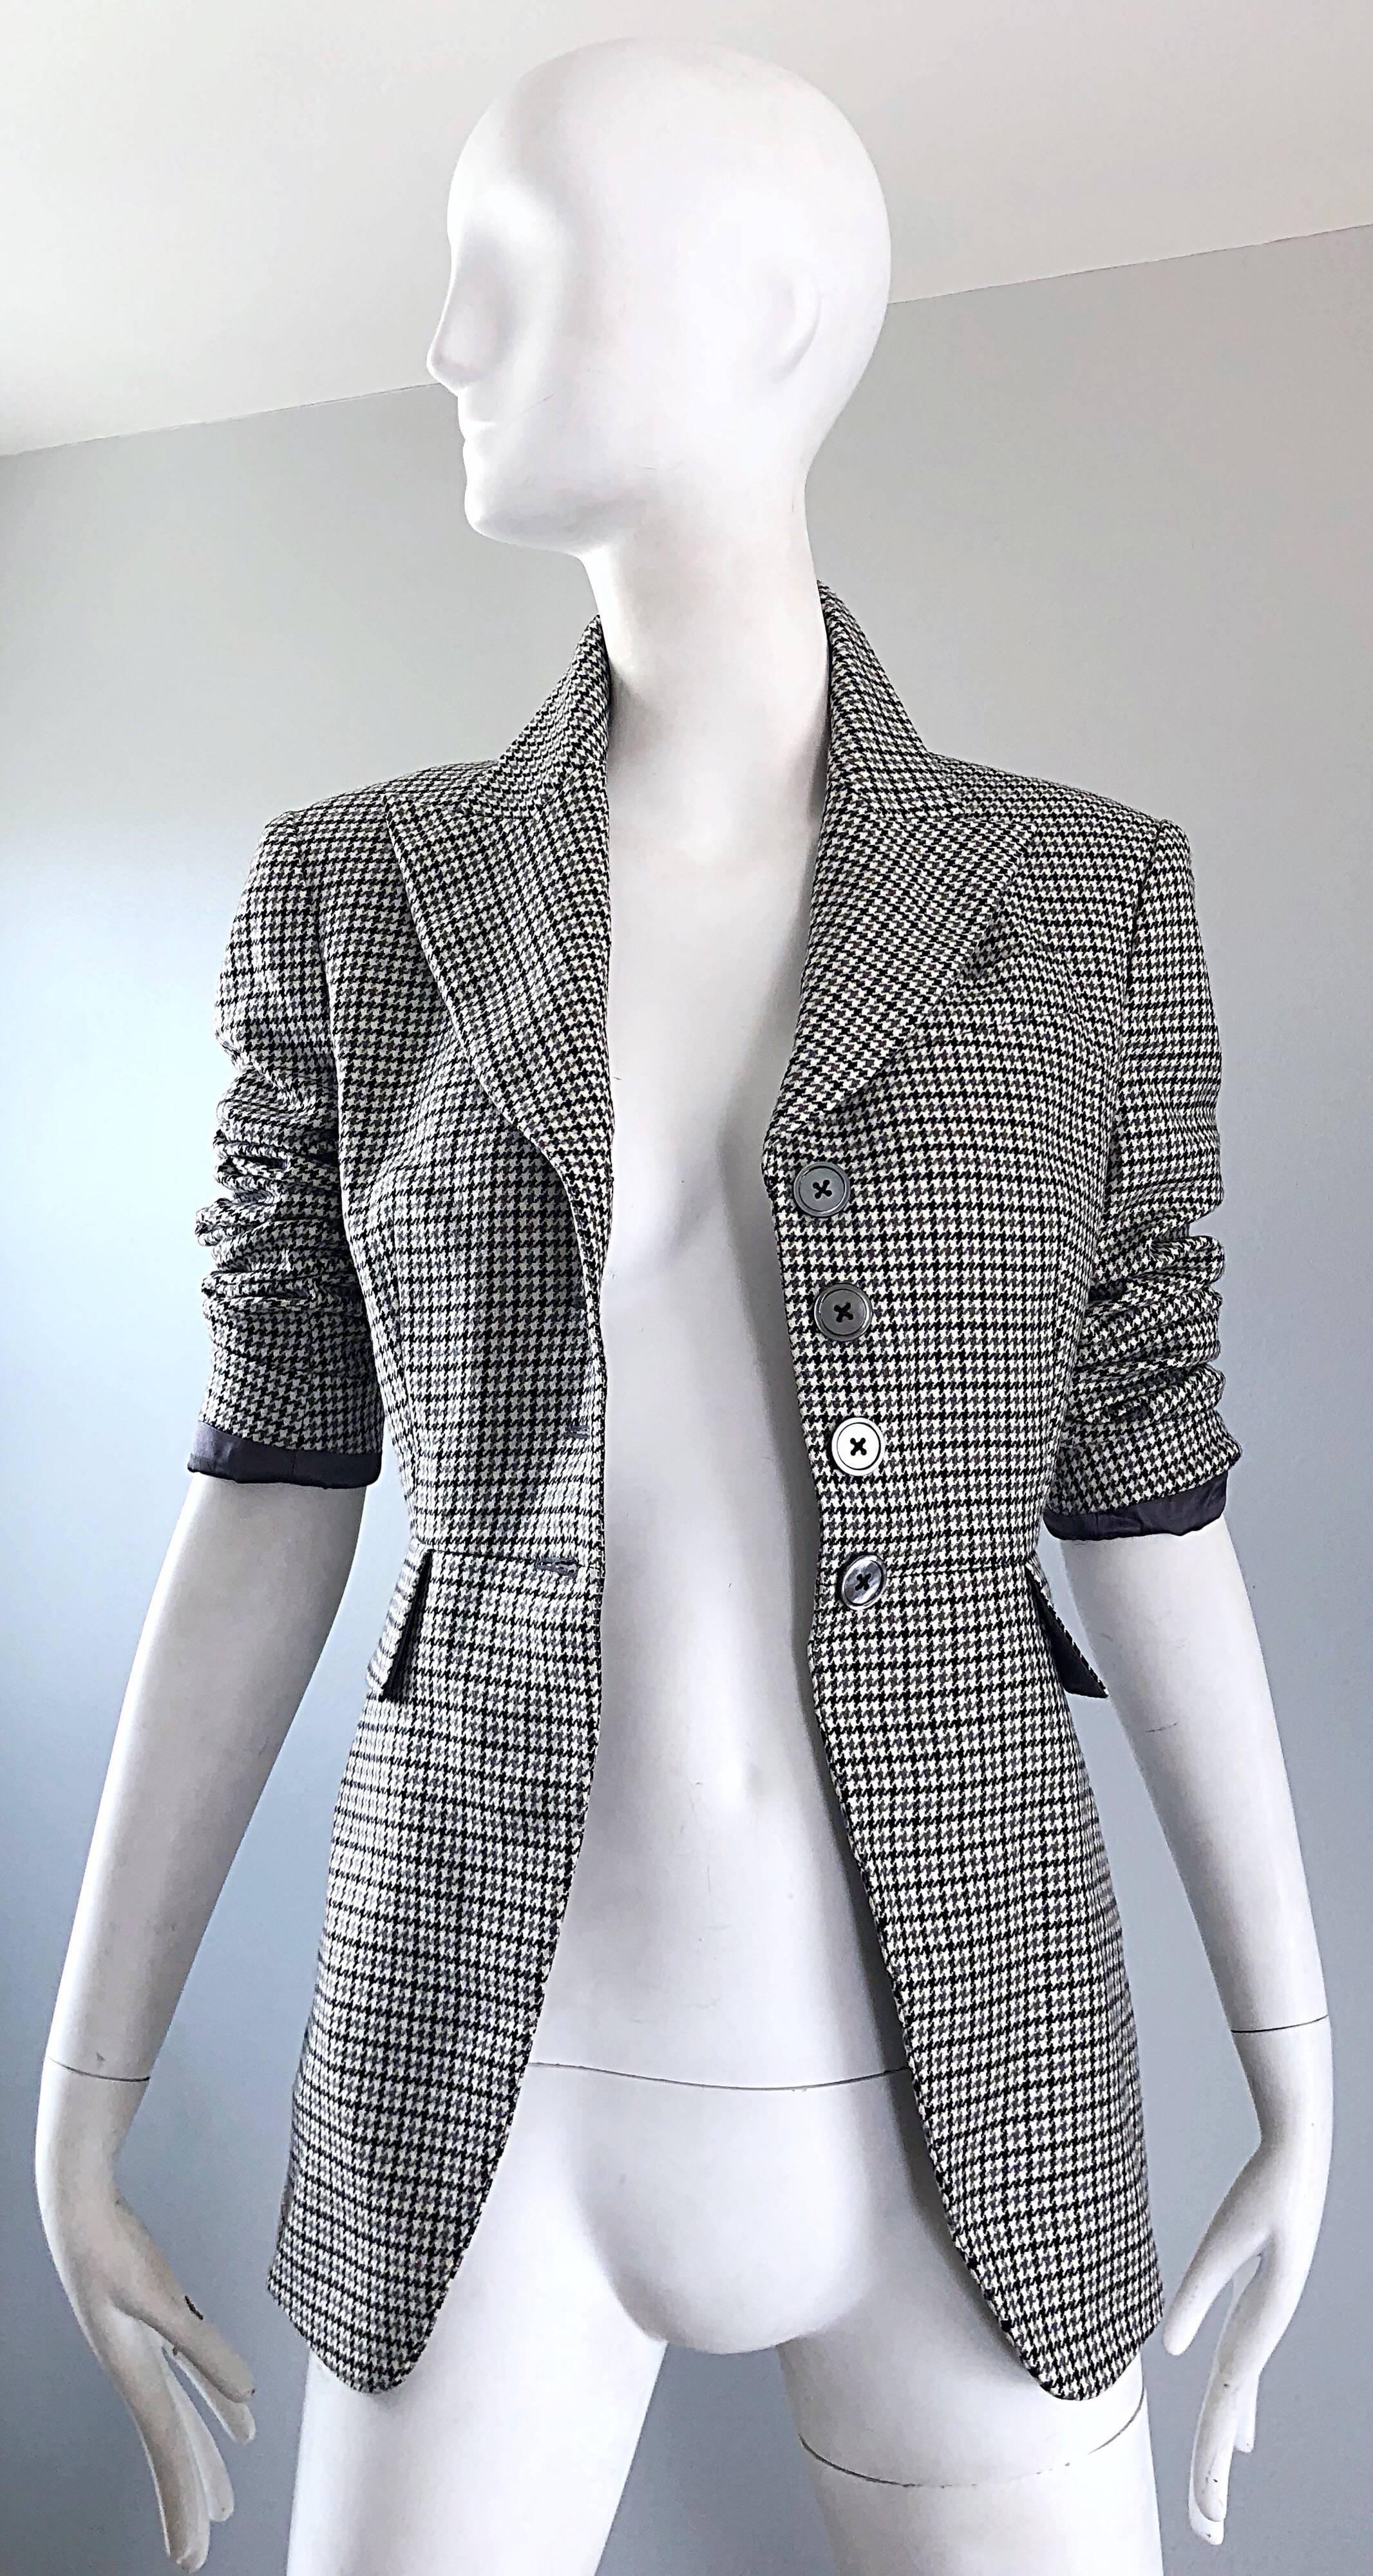 Michael Kors Collection 1990s Size 2 / 4 Gray + Black Houndstooth Blazer Jacket In Excellent Condition For Sale In San Diego, CA